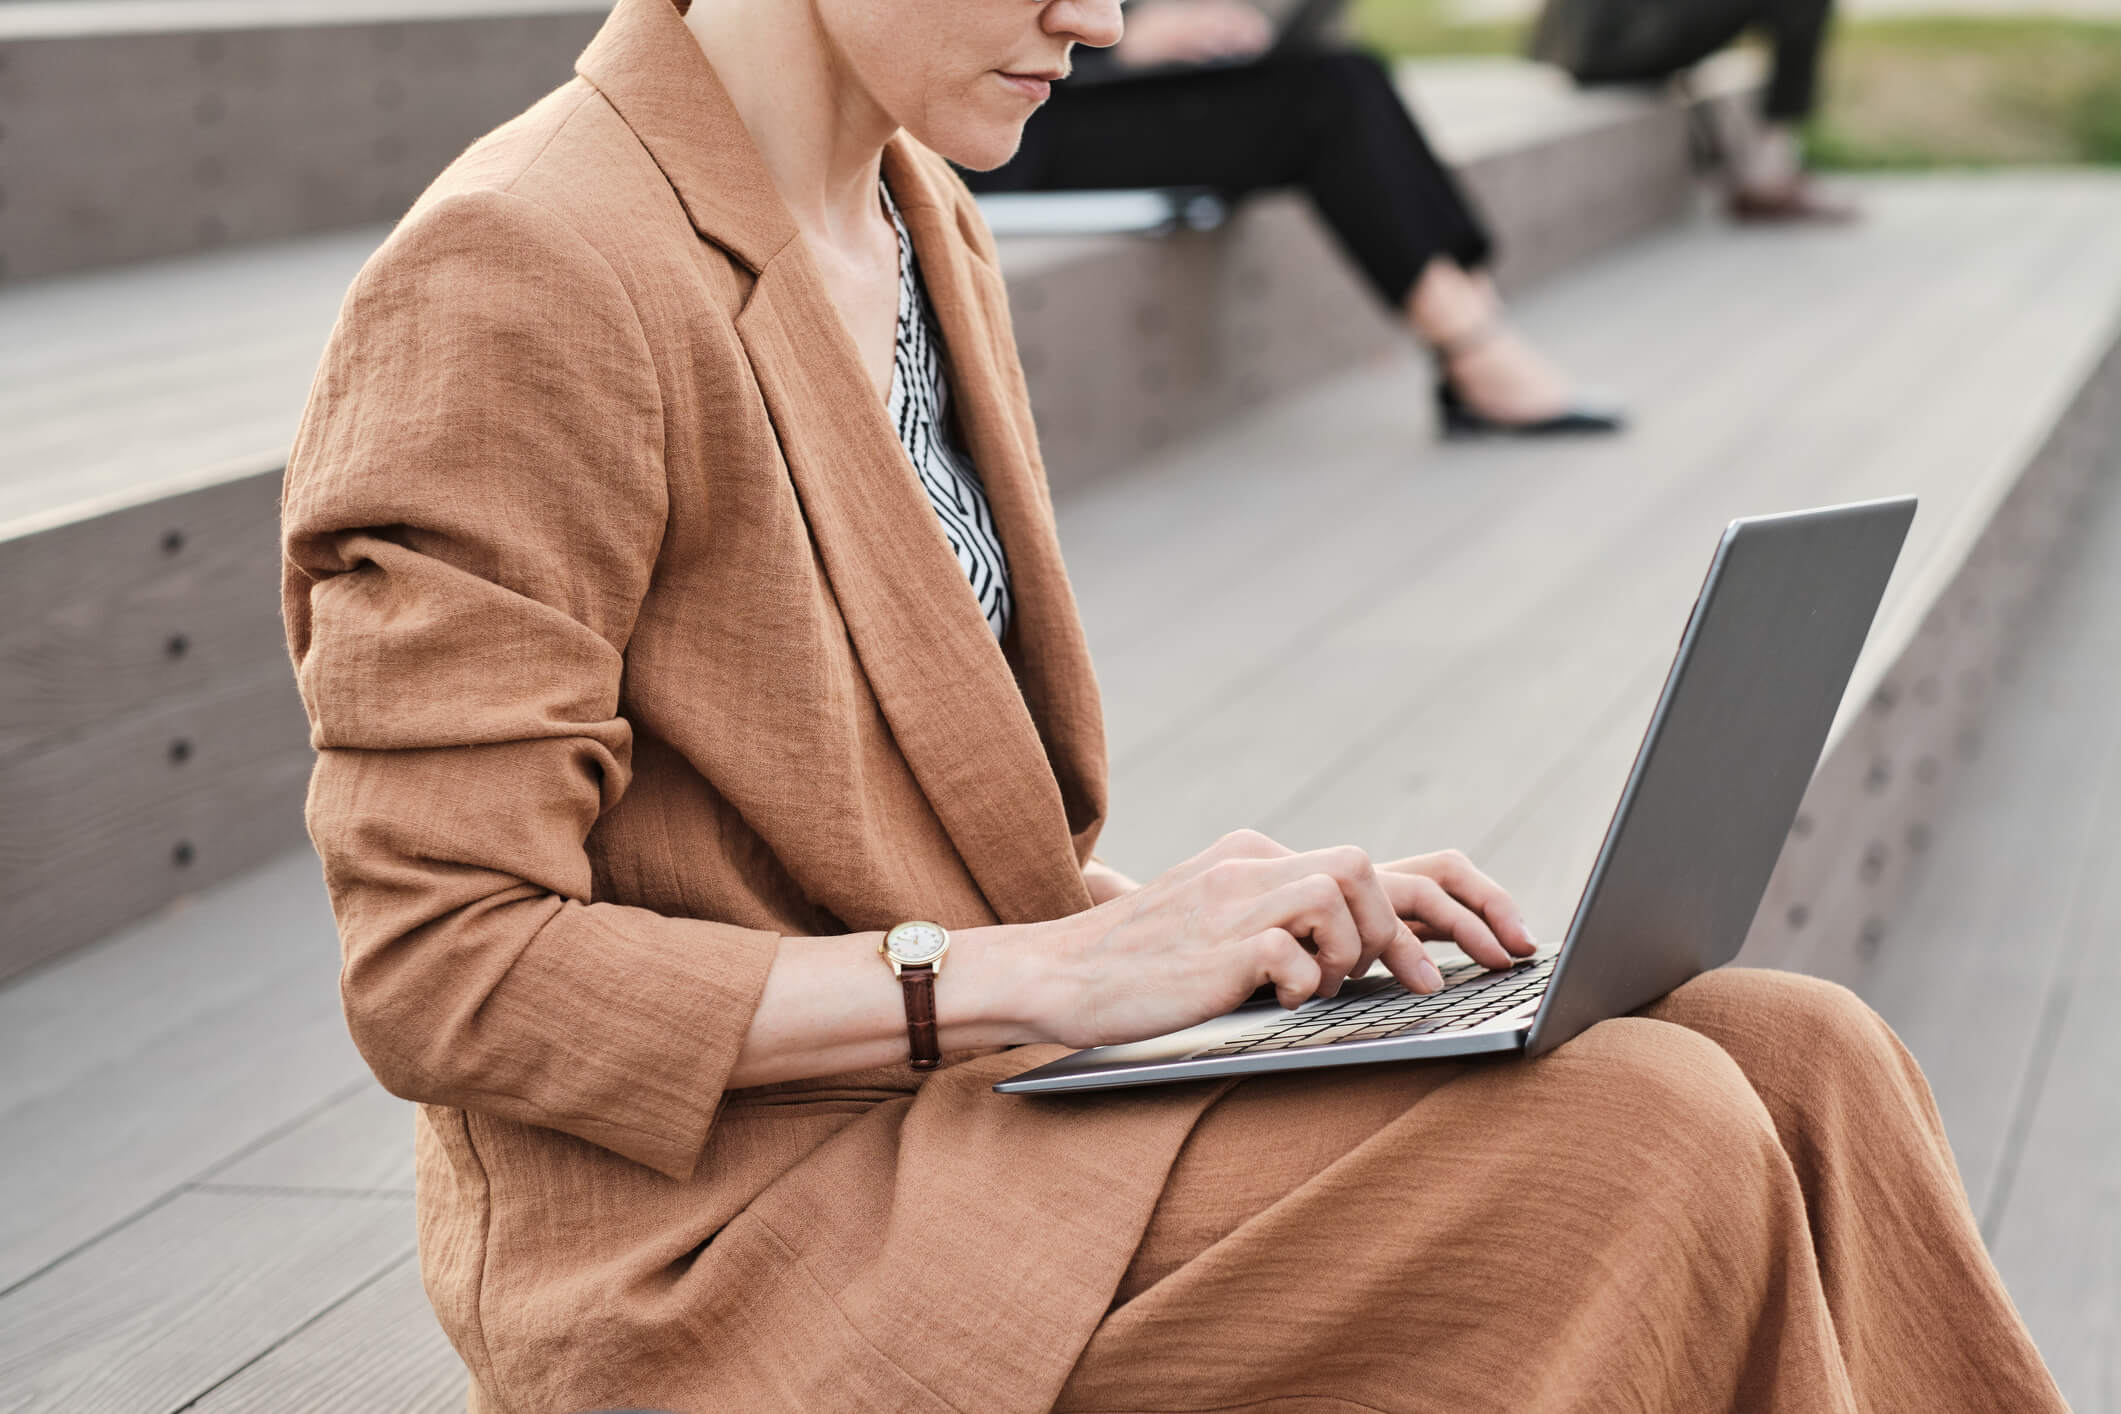 A close up of a woman sitting outside and using a laptop; she has a serious expression.